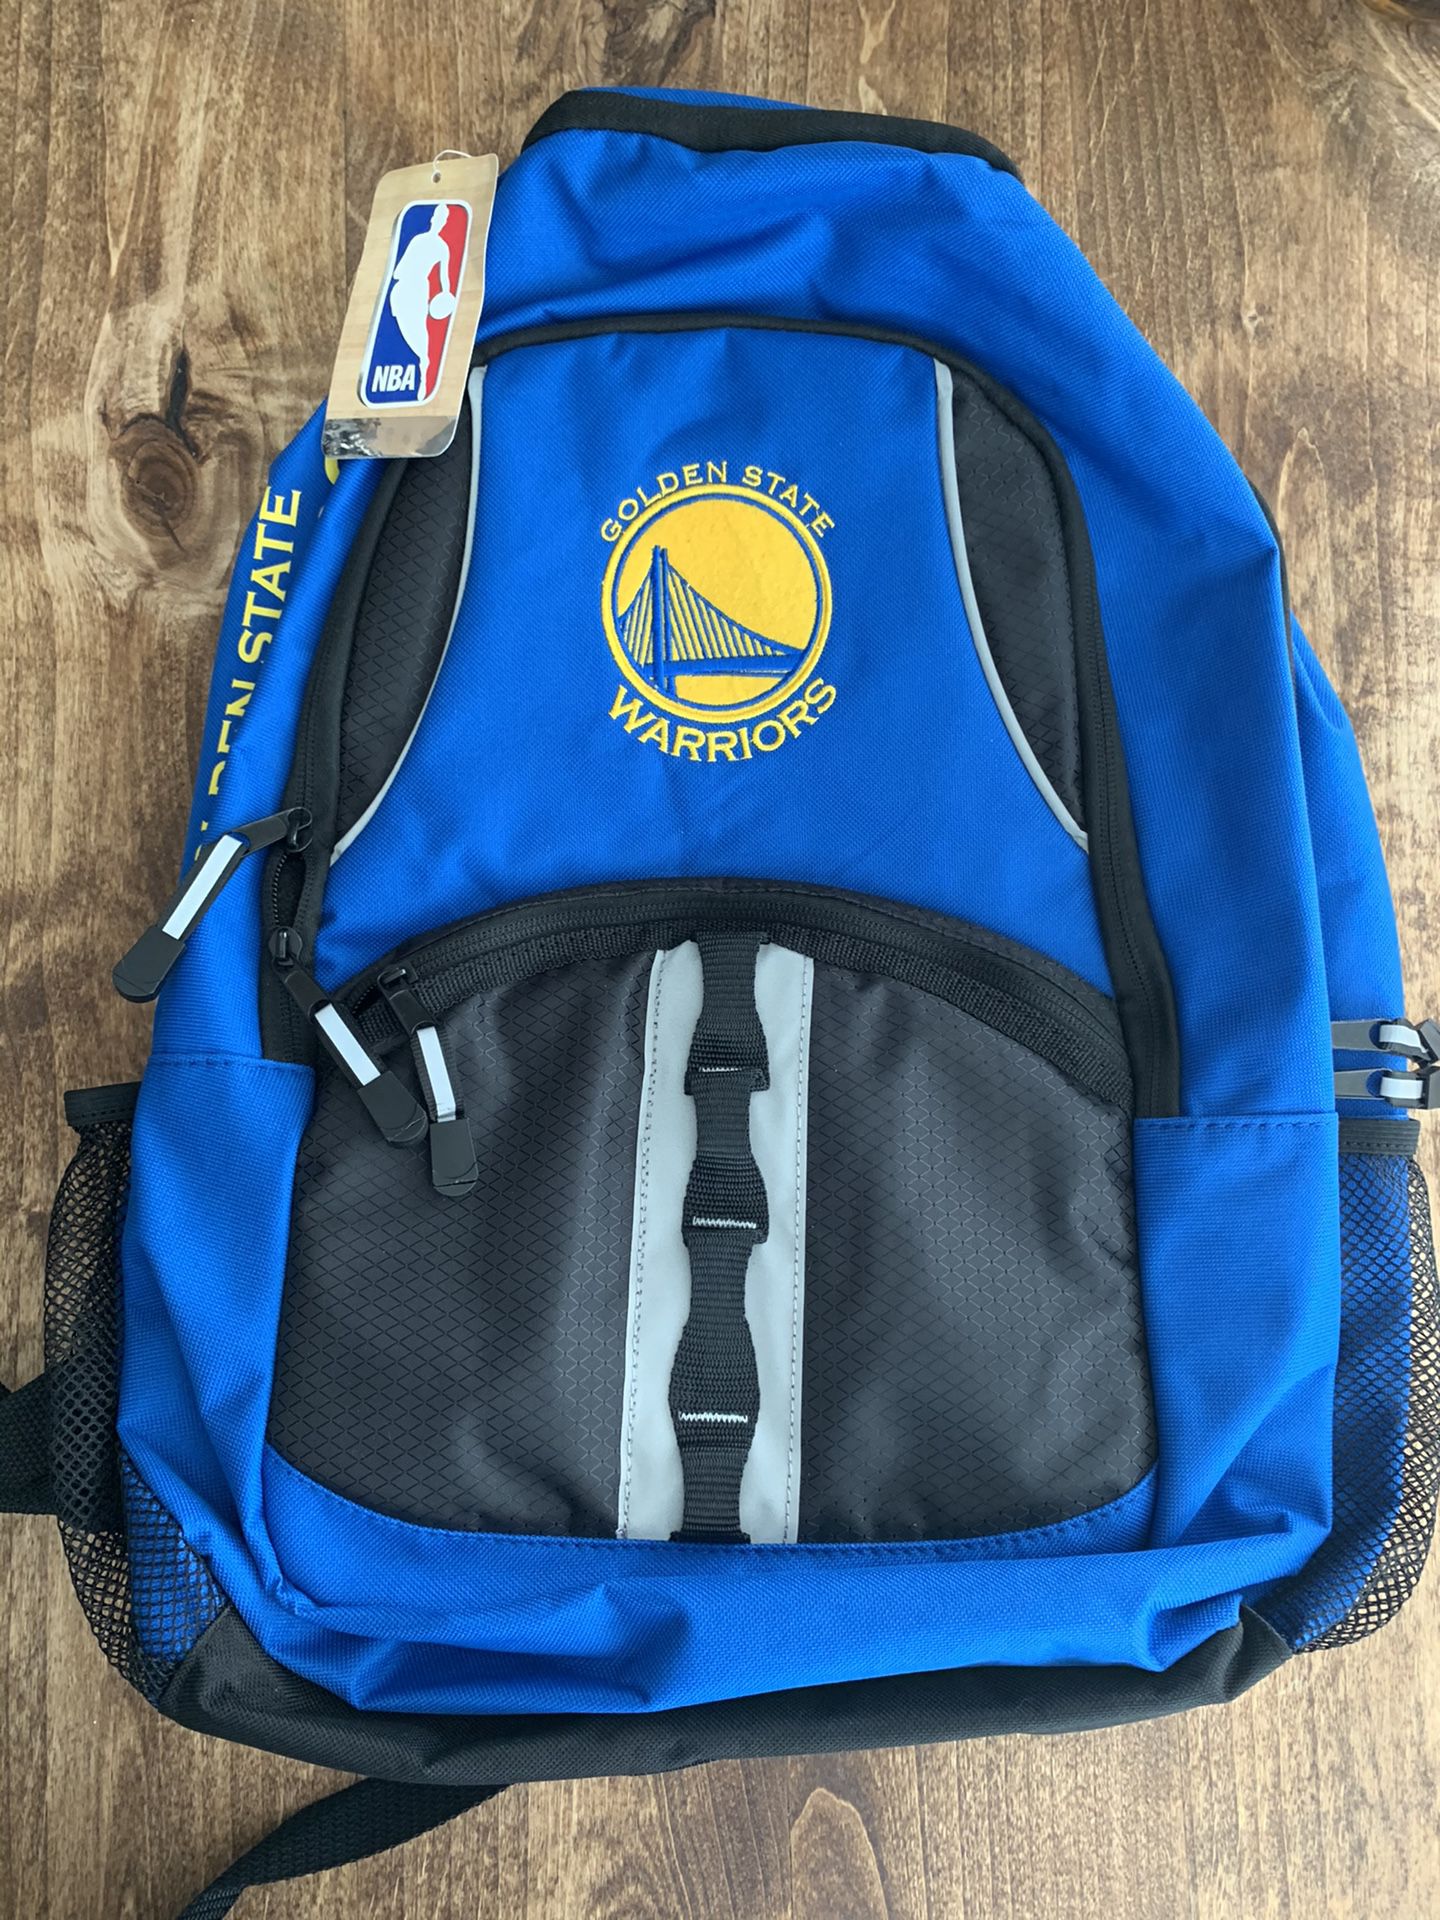 Golden State Warriors backpack NWT